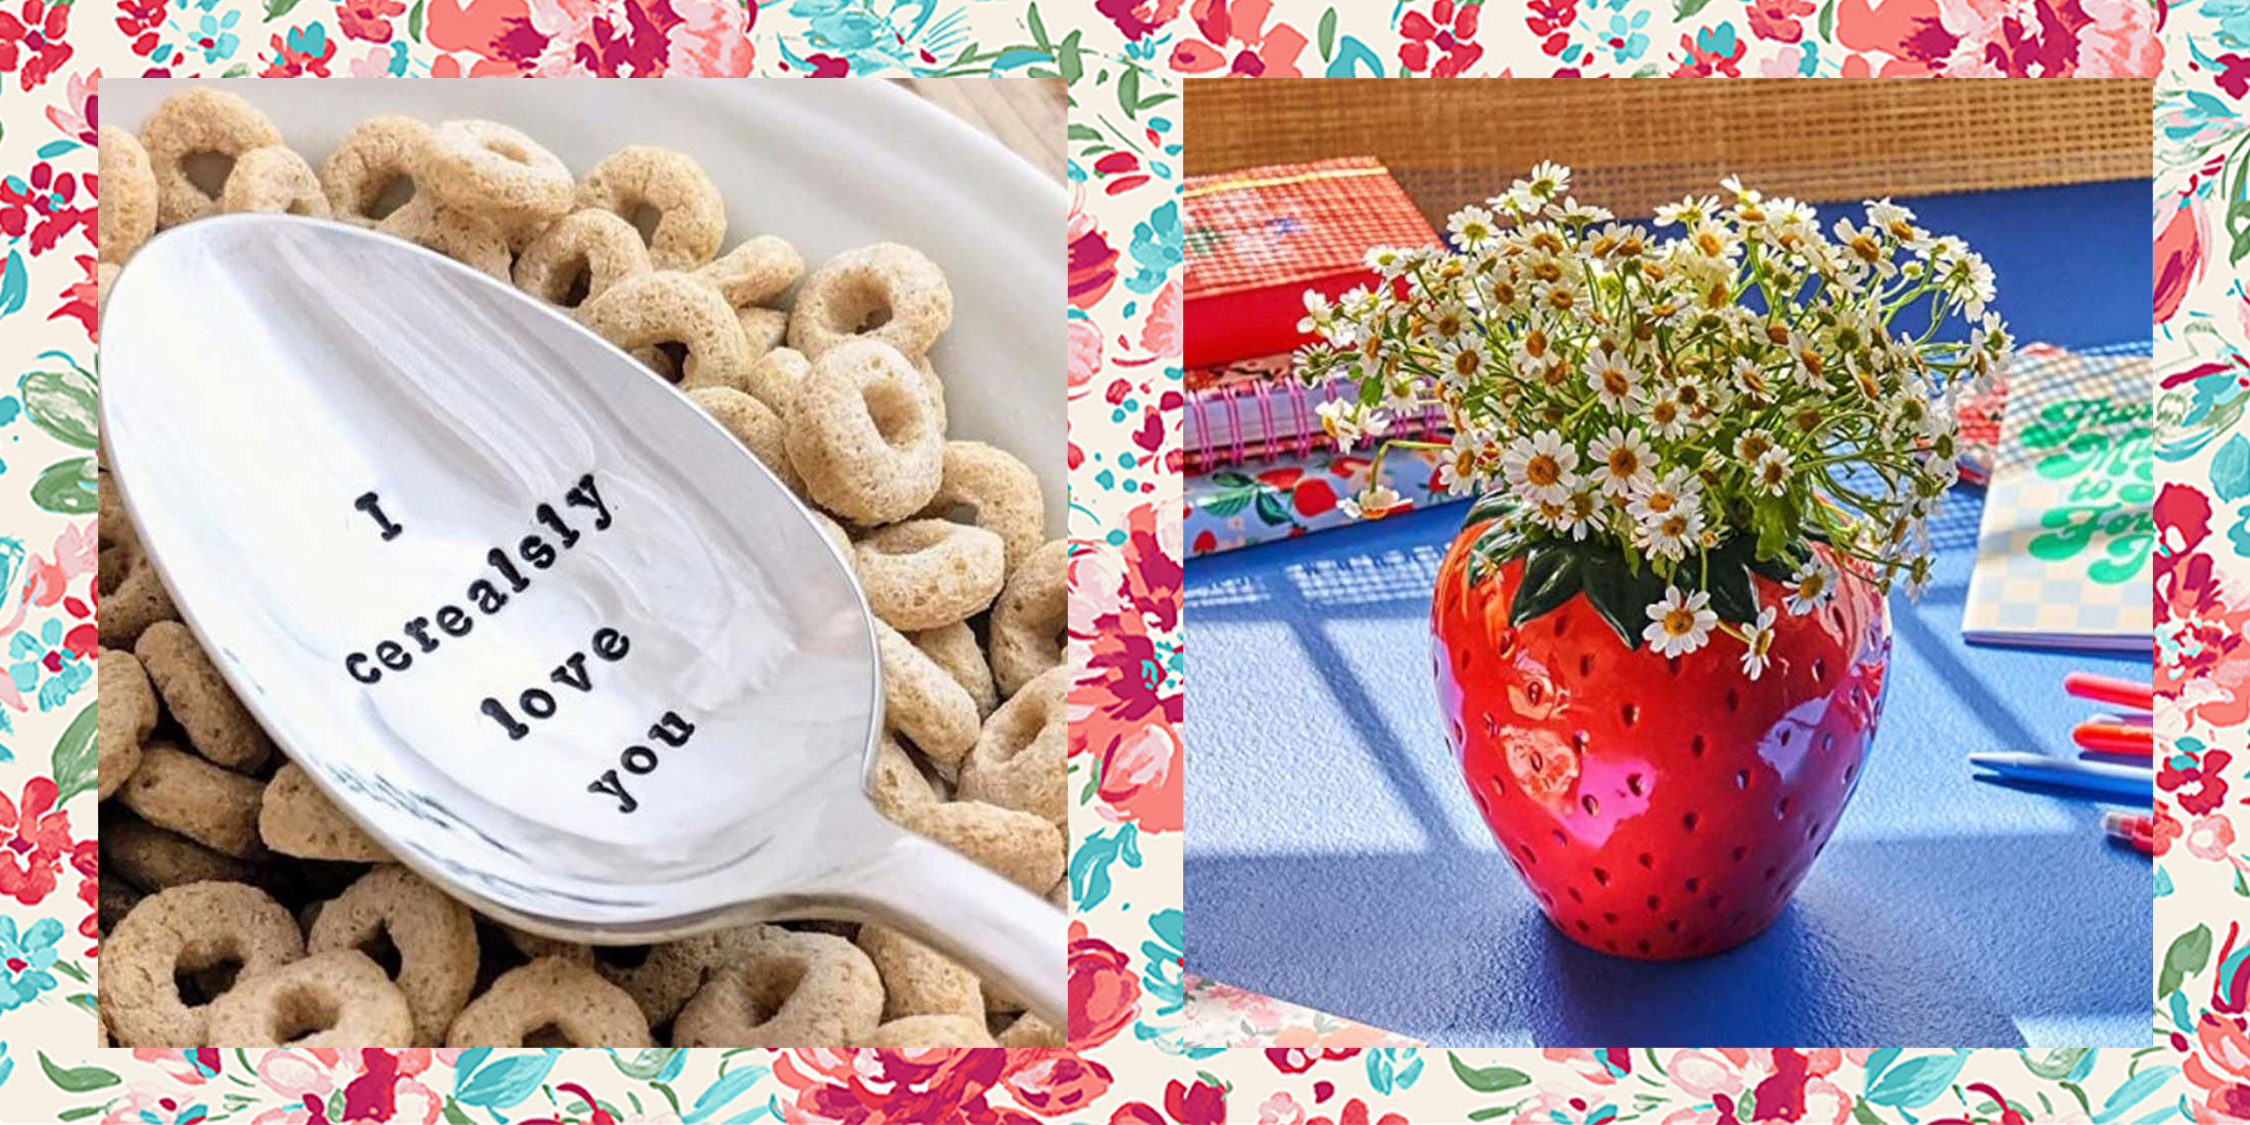 Galentines Day Gifts to Rejuvenate the Body & Soul - Central Florida Chic